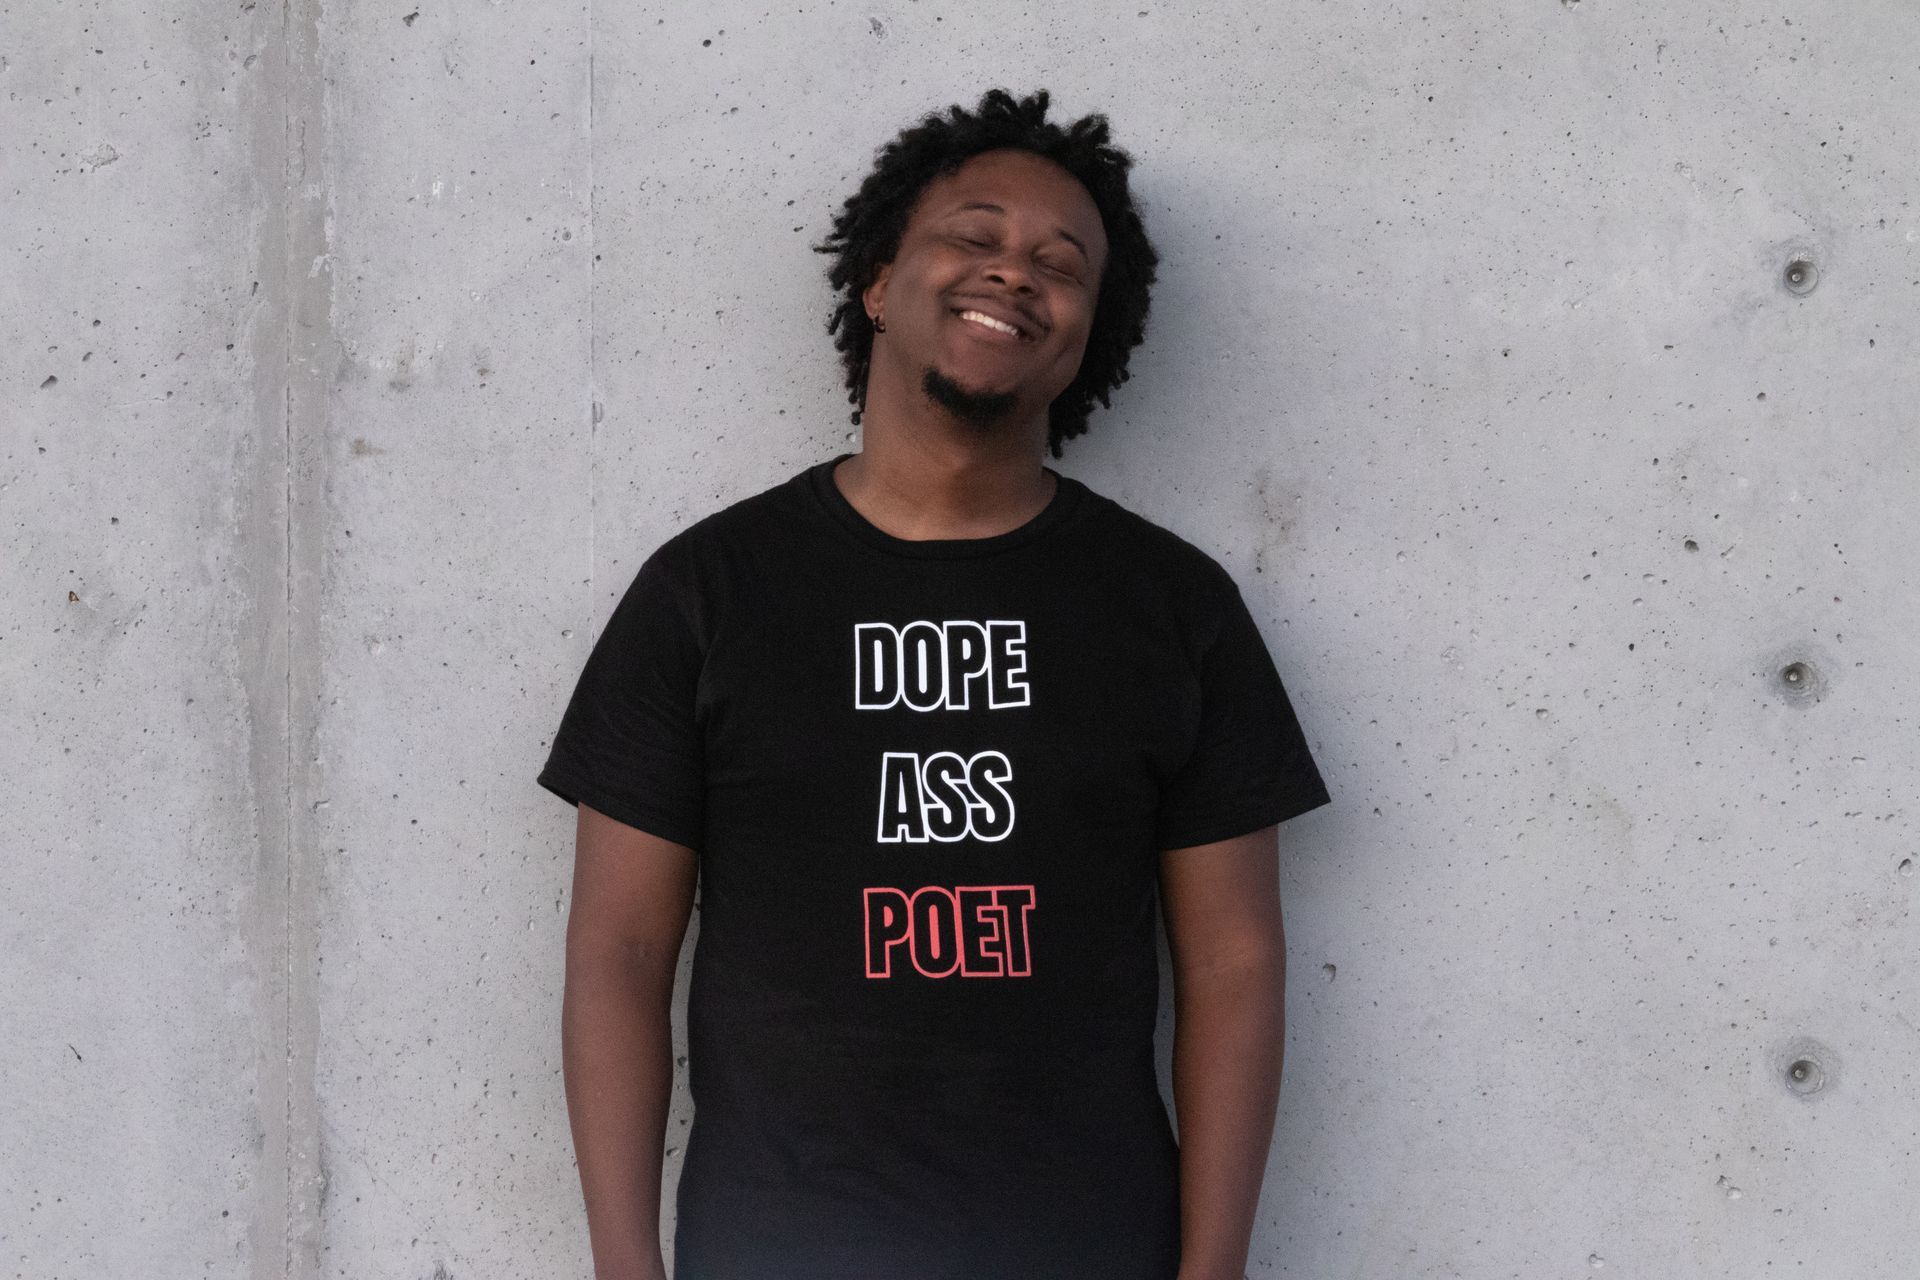 A person standing in front of a concrete wall smiling while wearing a t-shirt that says 